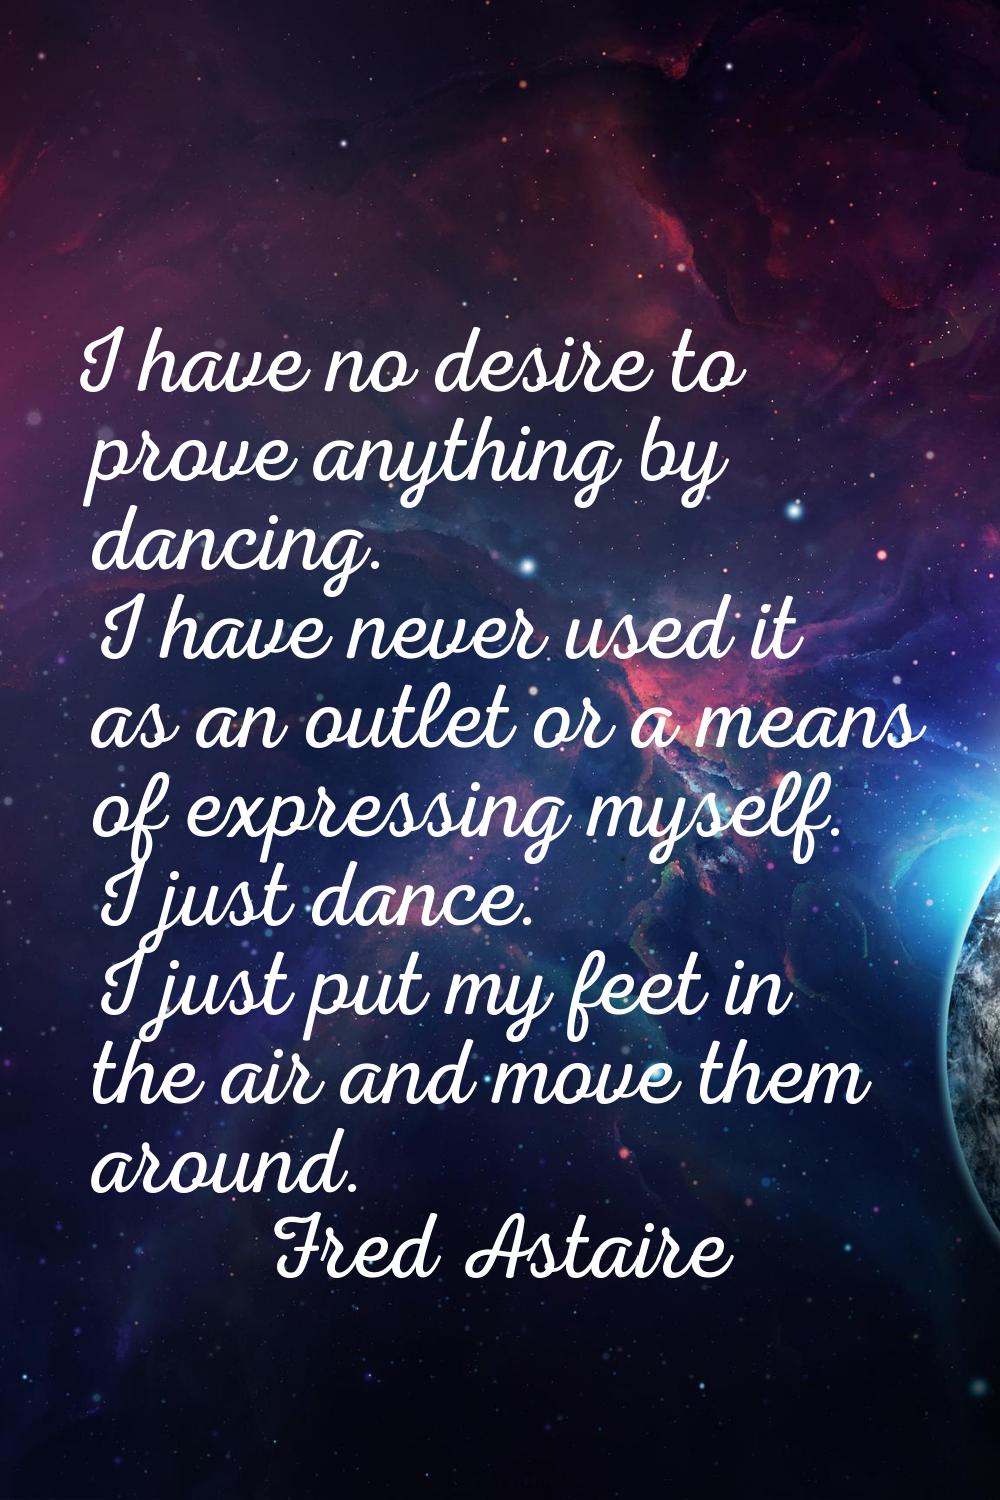 I have no desire to prove anything by dancing. I have never used it as an outlet or a means of expr